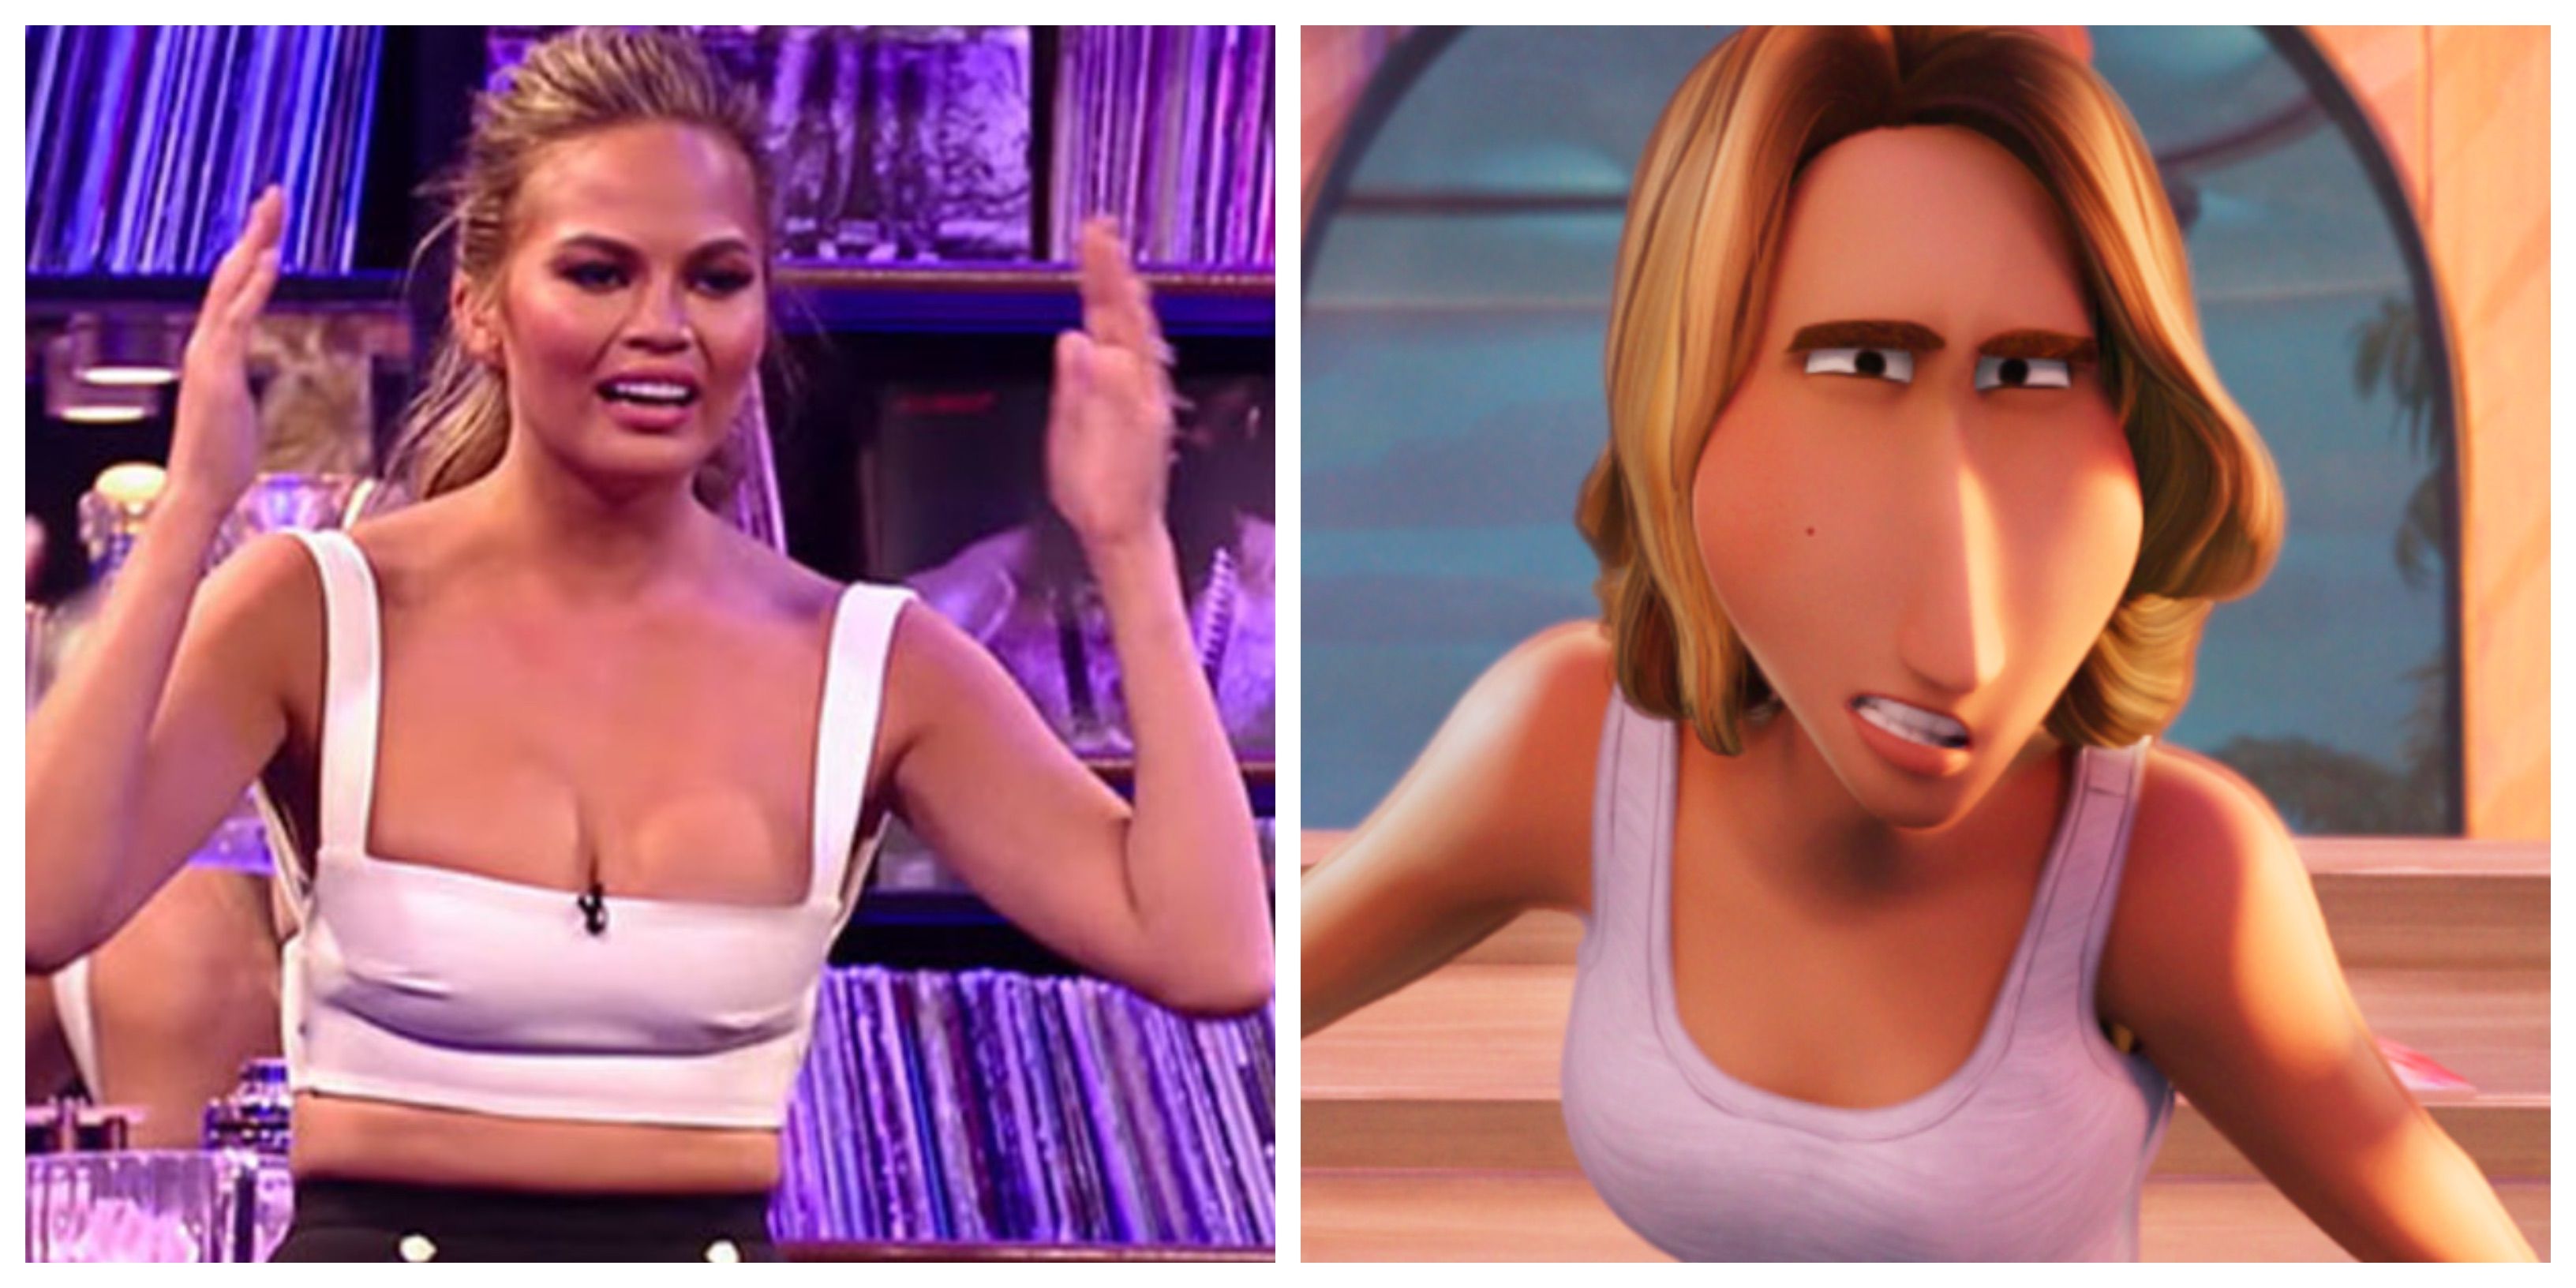 Chrissy Teigen as Hailey Posey in The Mitchells vs. the Machines on Netflix